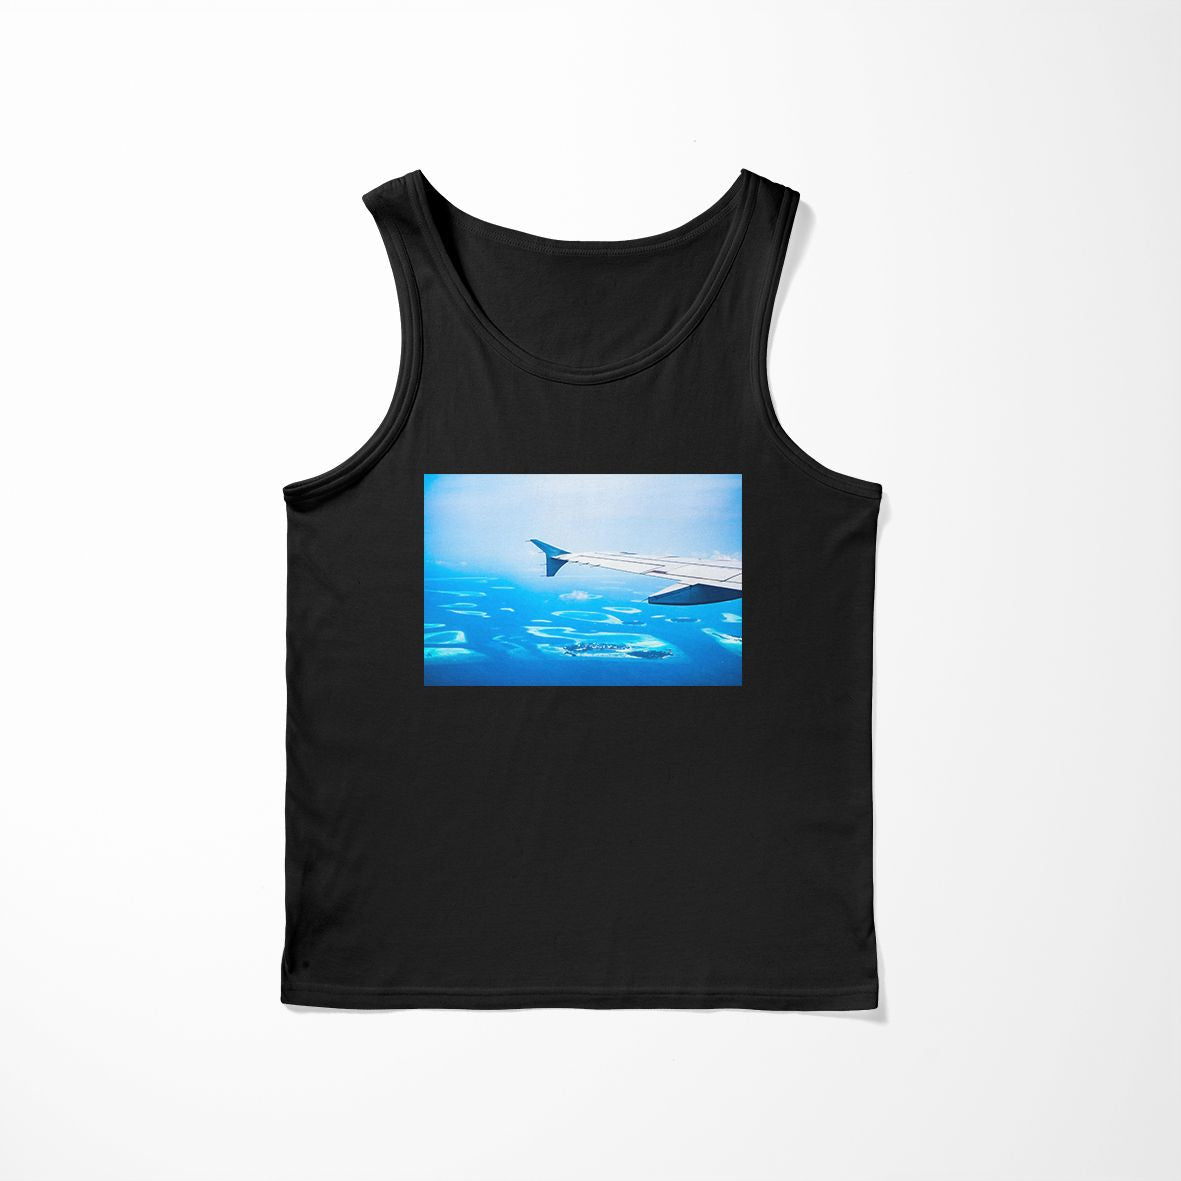 Outstanding View Through Airplane Wing Designed Tank Tops